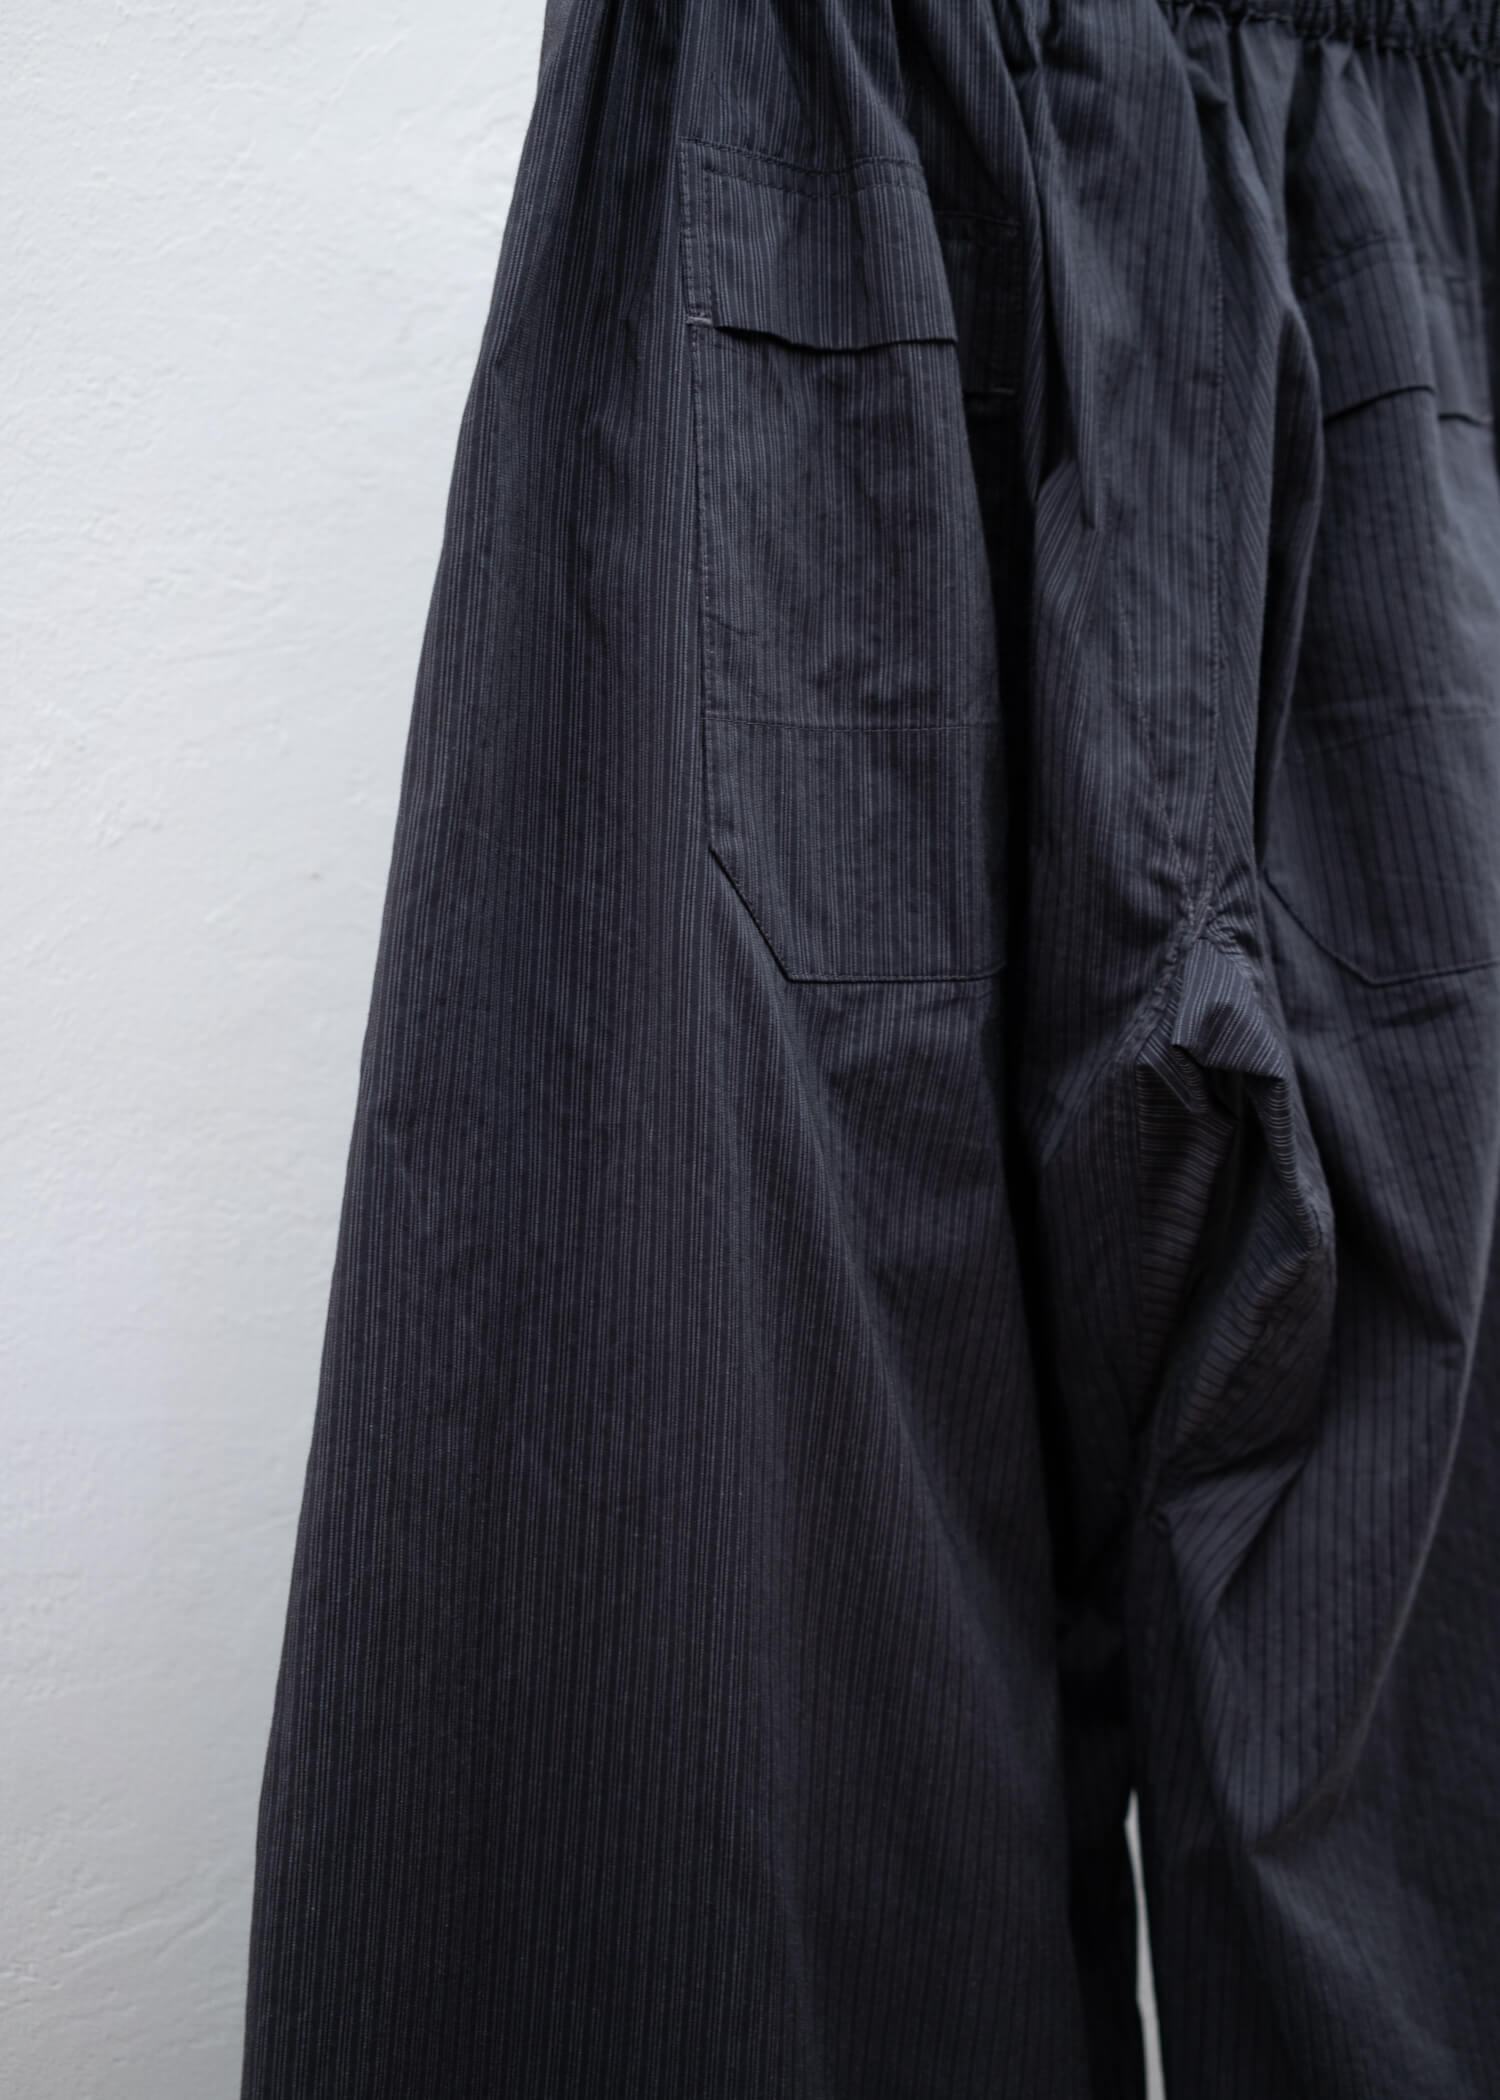 JAN-JAN VAN ESSCHE "TROUSERS#77" LOOSE FIT SINGLE PLEATED TROUSERS ANTHRACITE RIDGED STRIPED SHIRTING